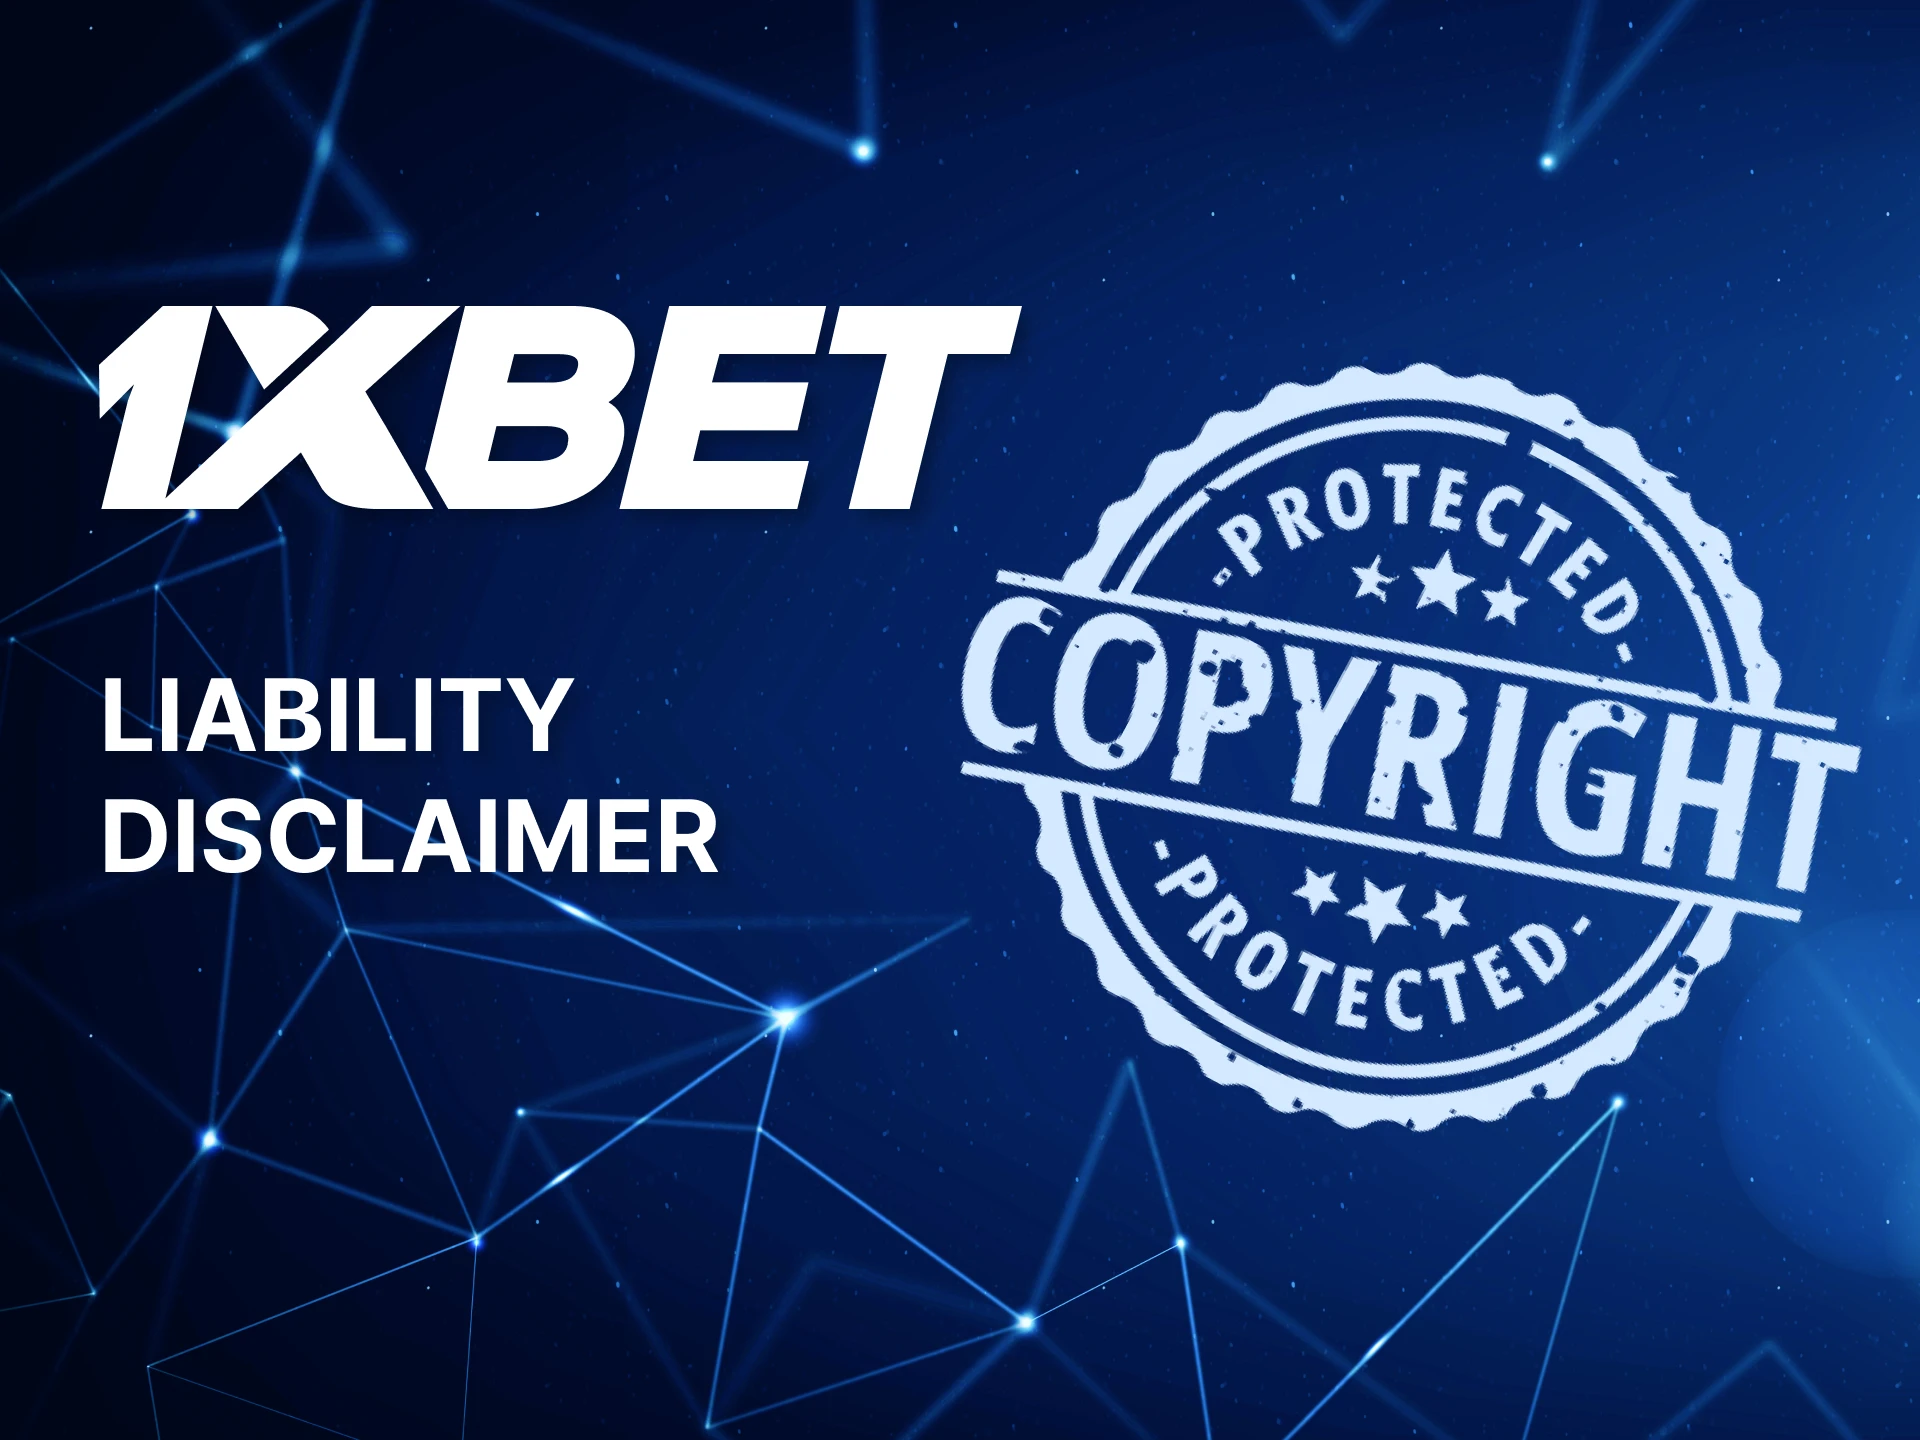 The data on the 1xBet website is copyright protected.